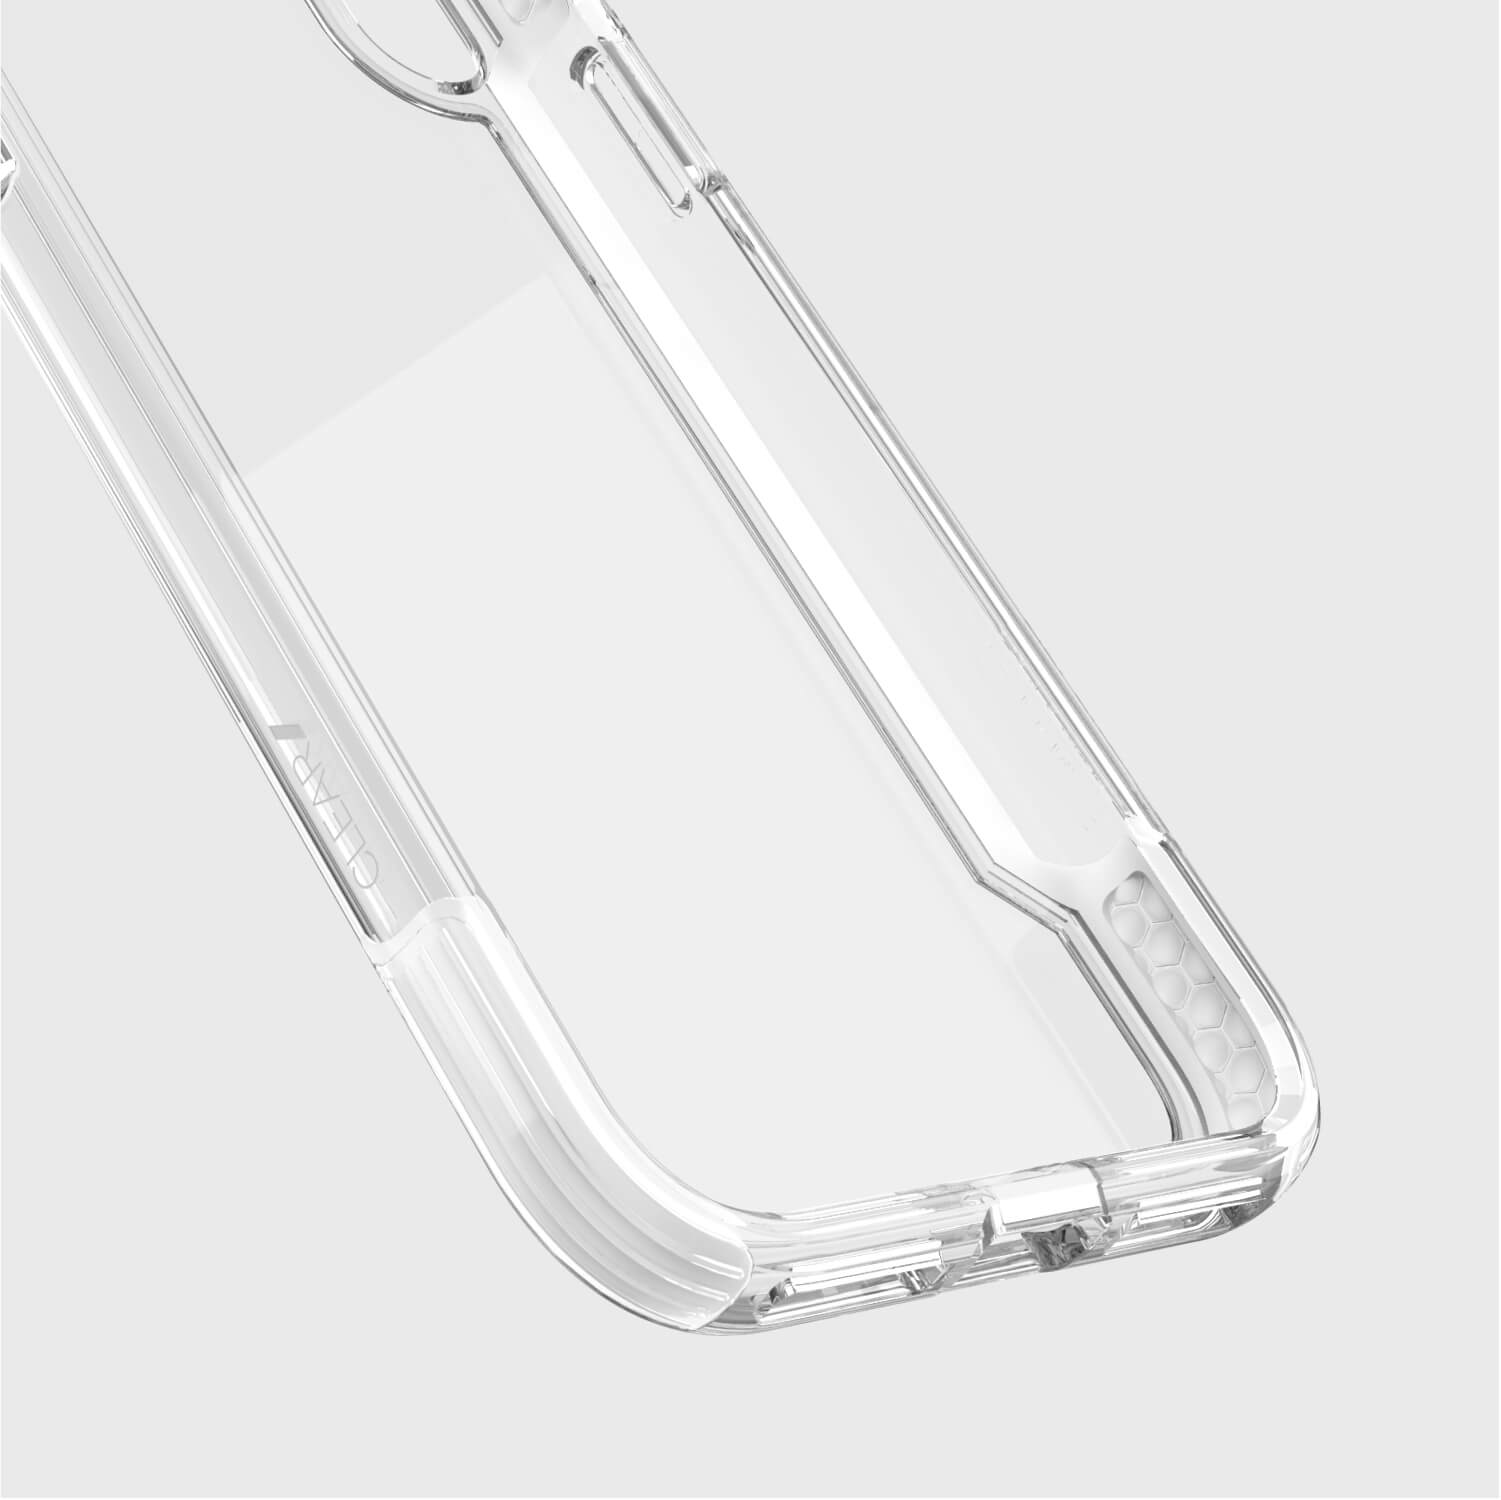 A Raptic clear case for the iPhone XR.